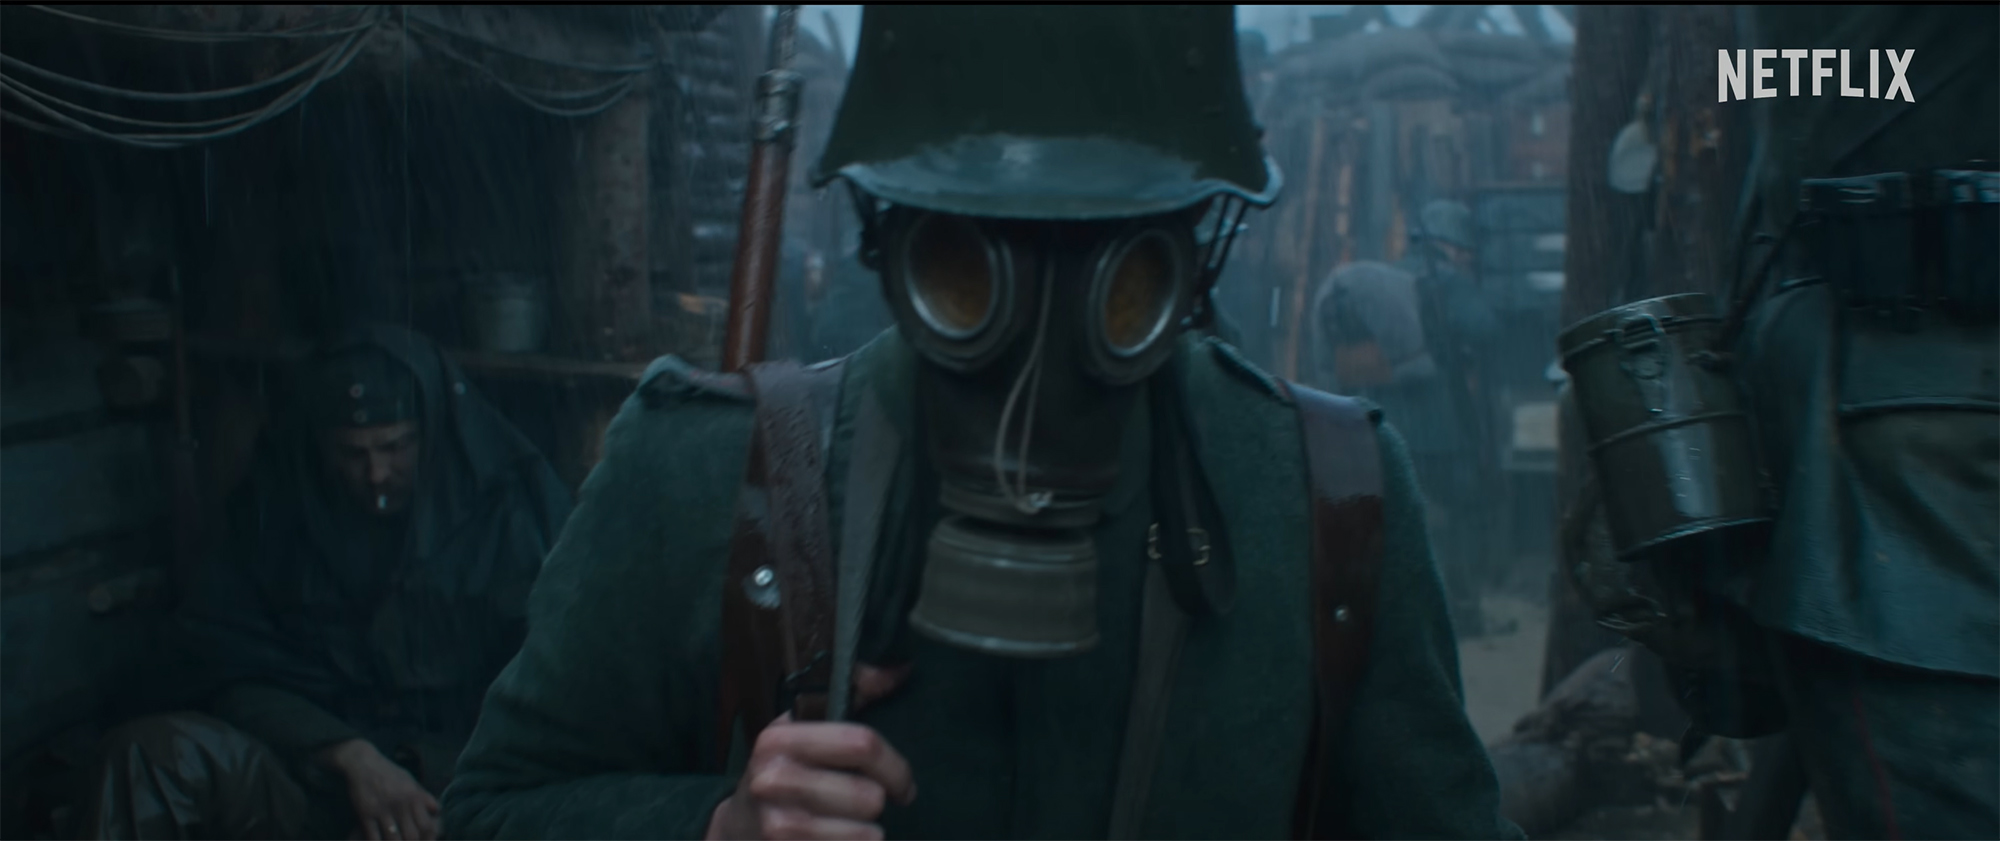 Film still showing a WWI soldier wearing a gas mask and walking forward towards the viewer